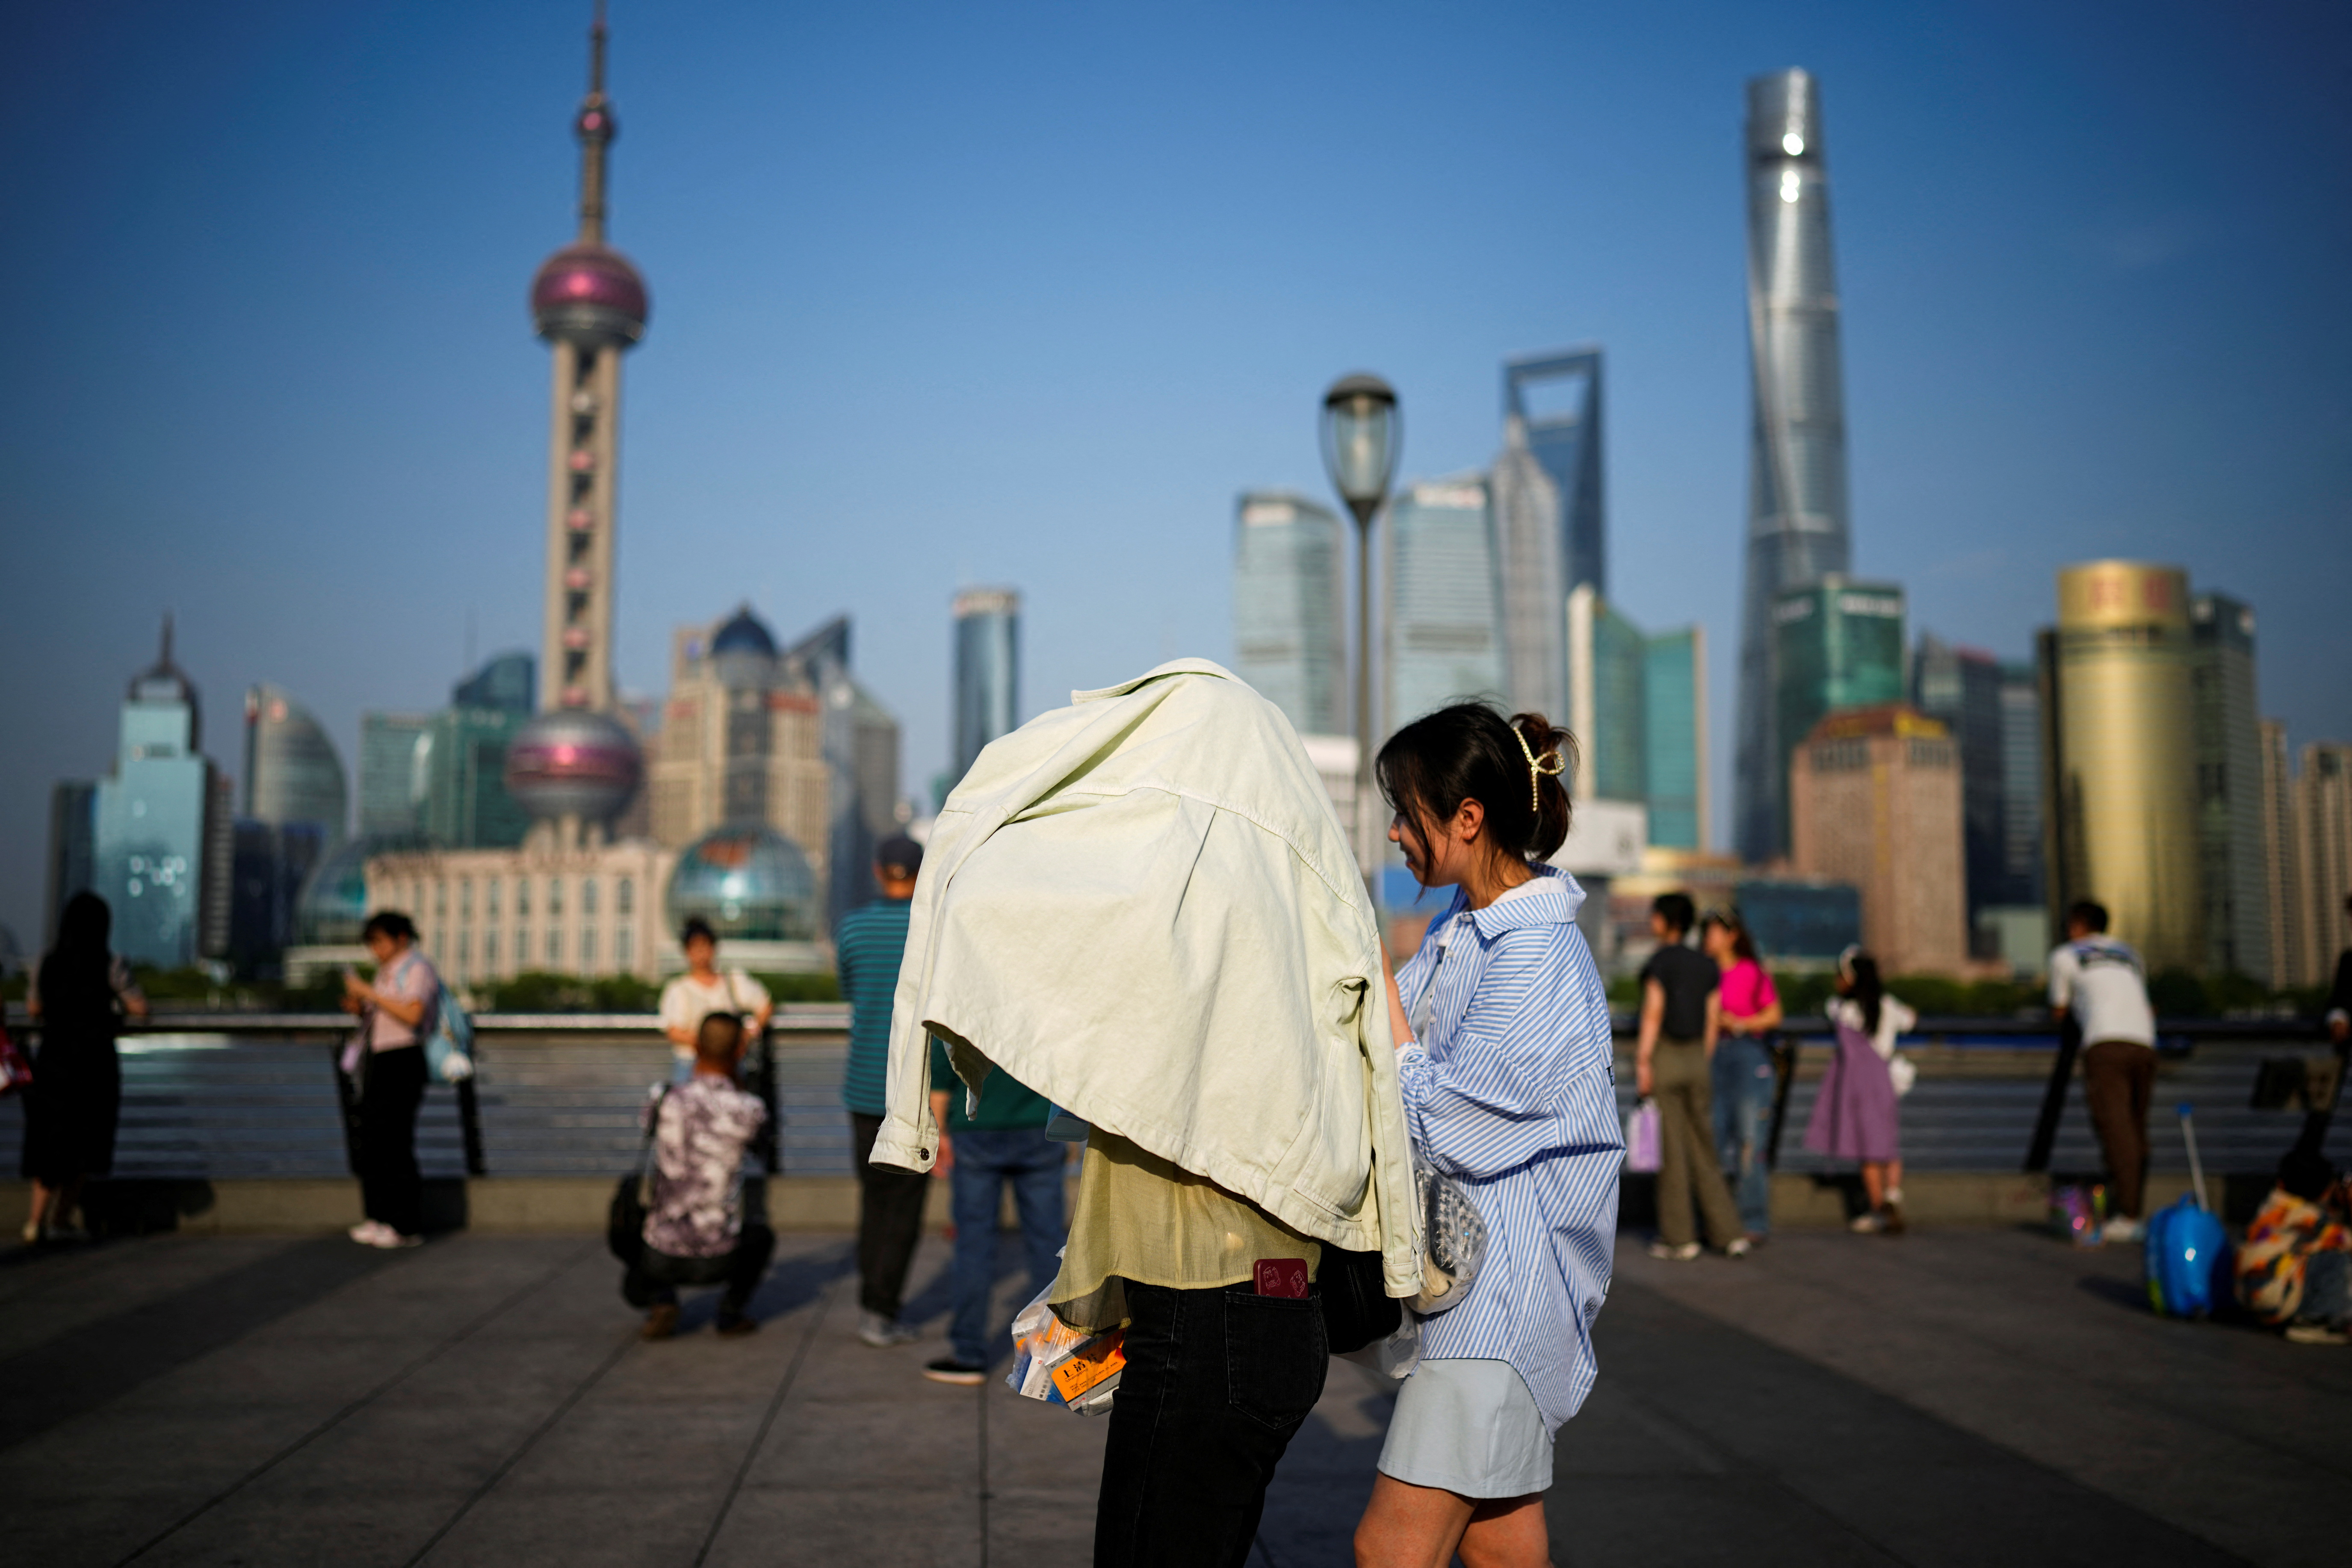 Shanghai breaks more than century-old heat record in sweltering May | Reuters